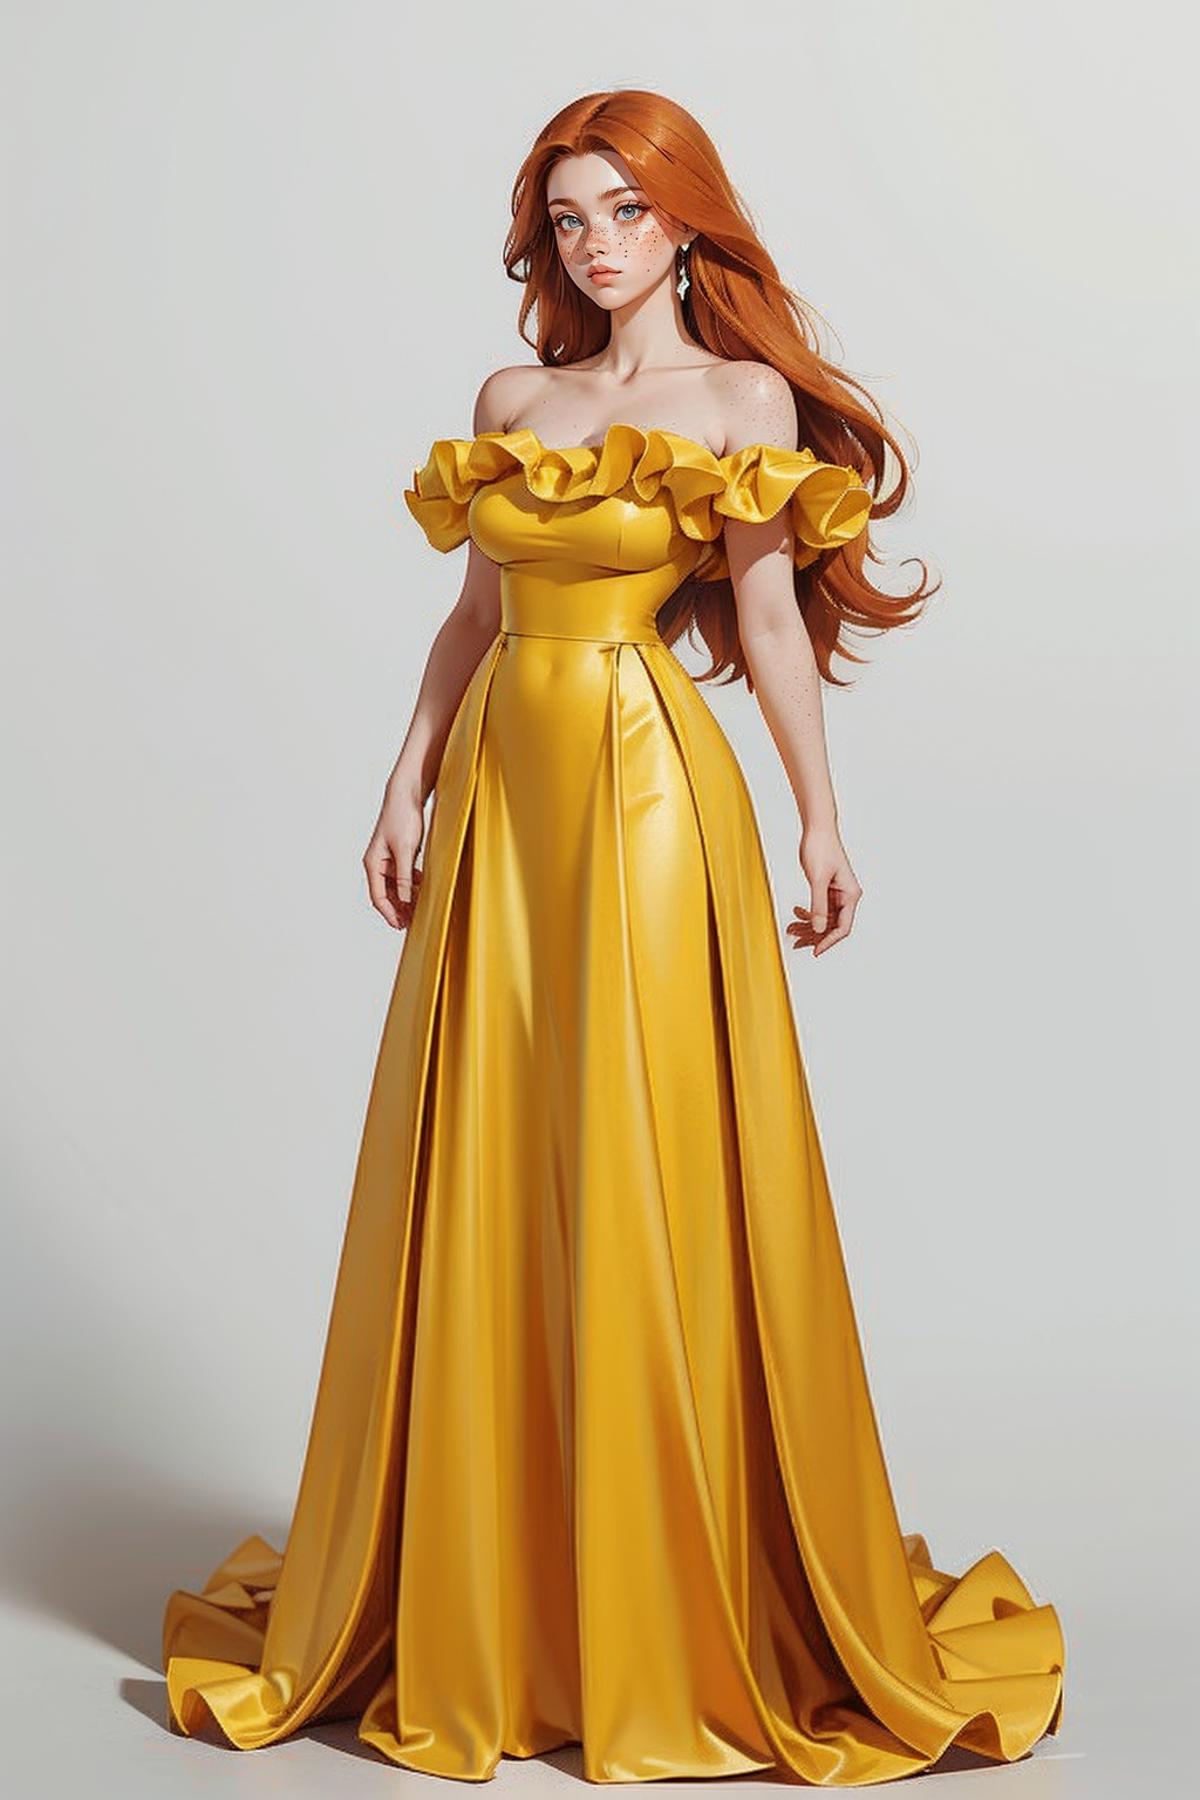 Off-Shoulder Yellow Dress image by freckledvixon